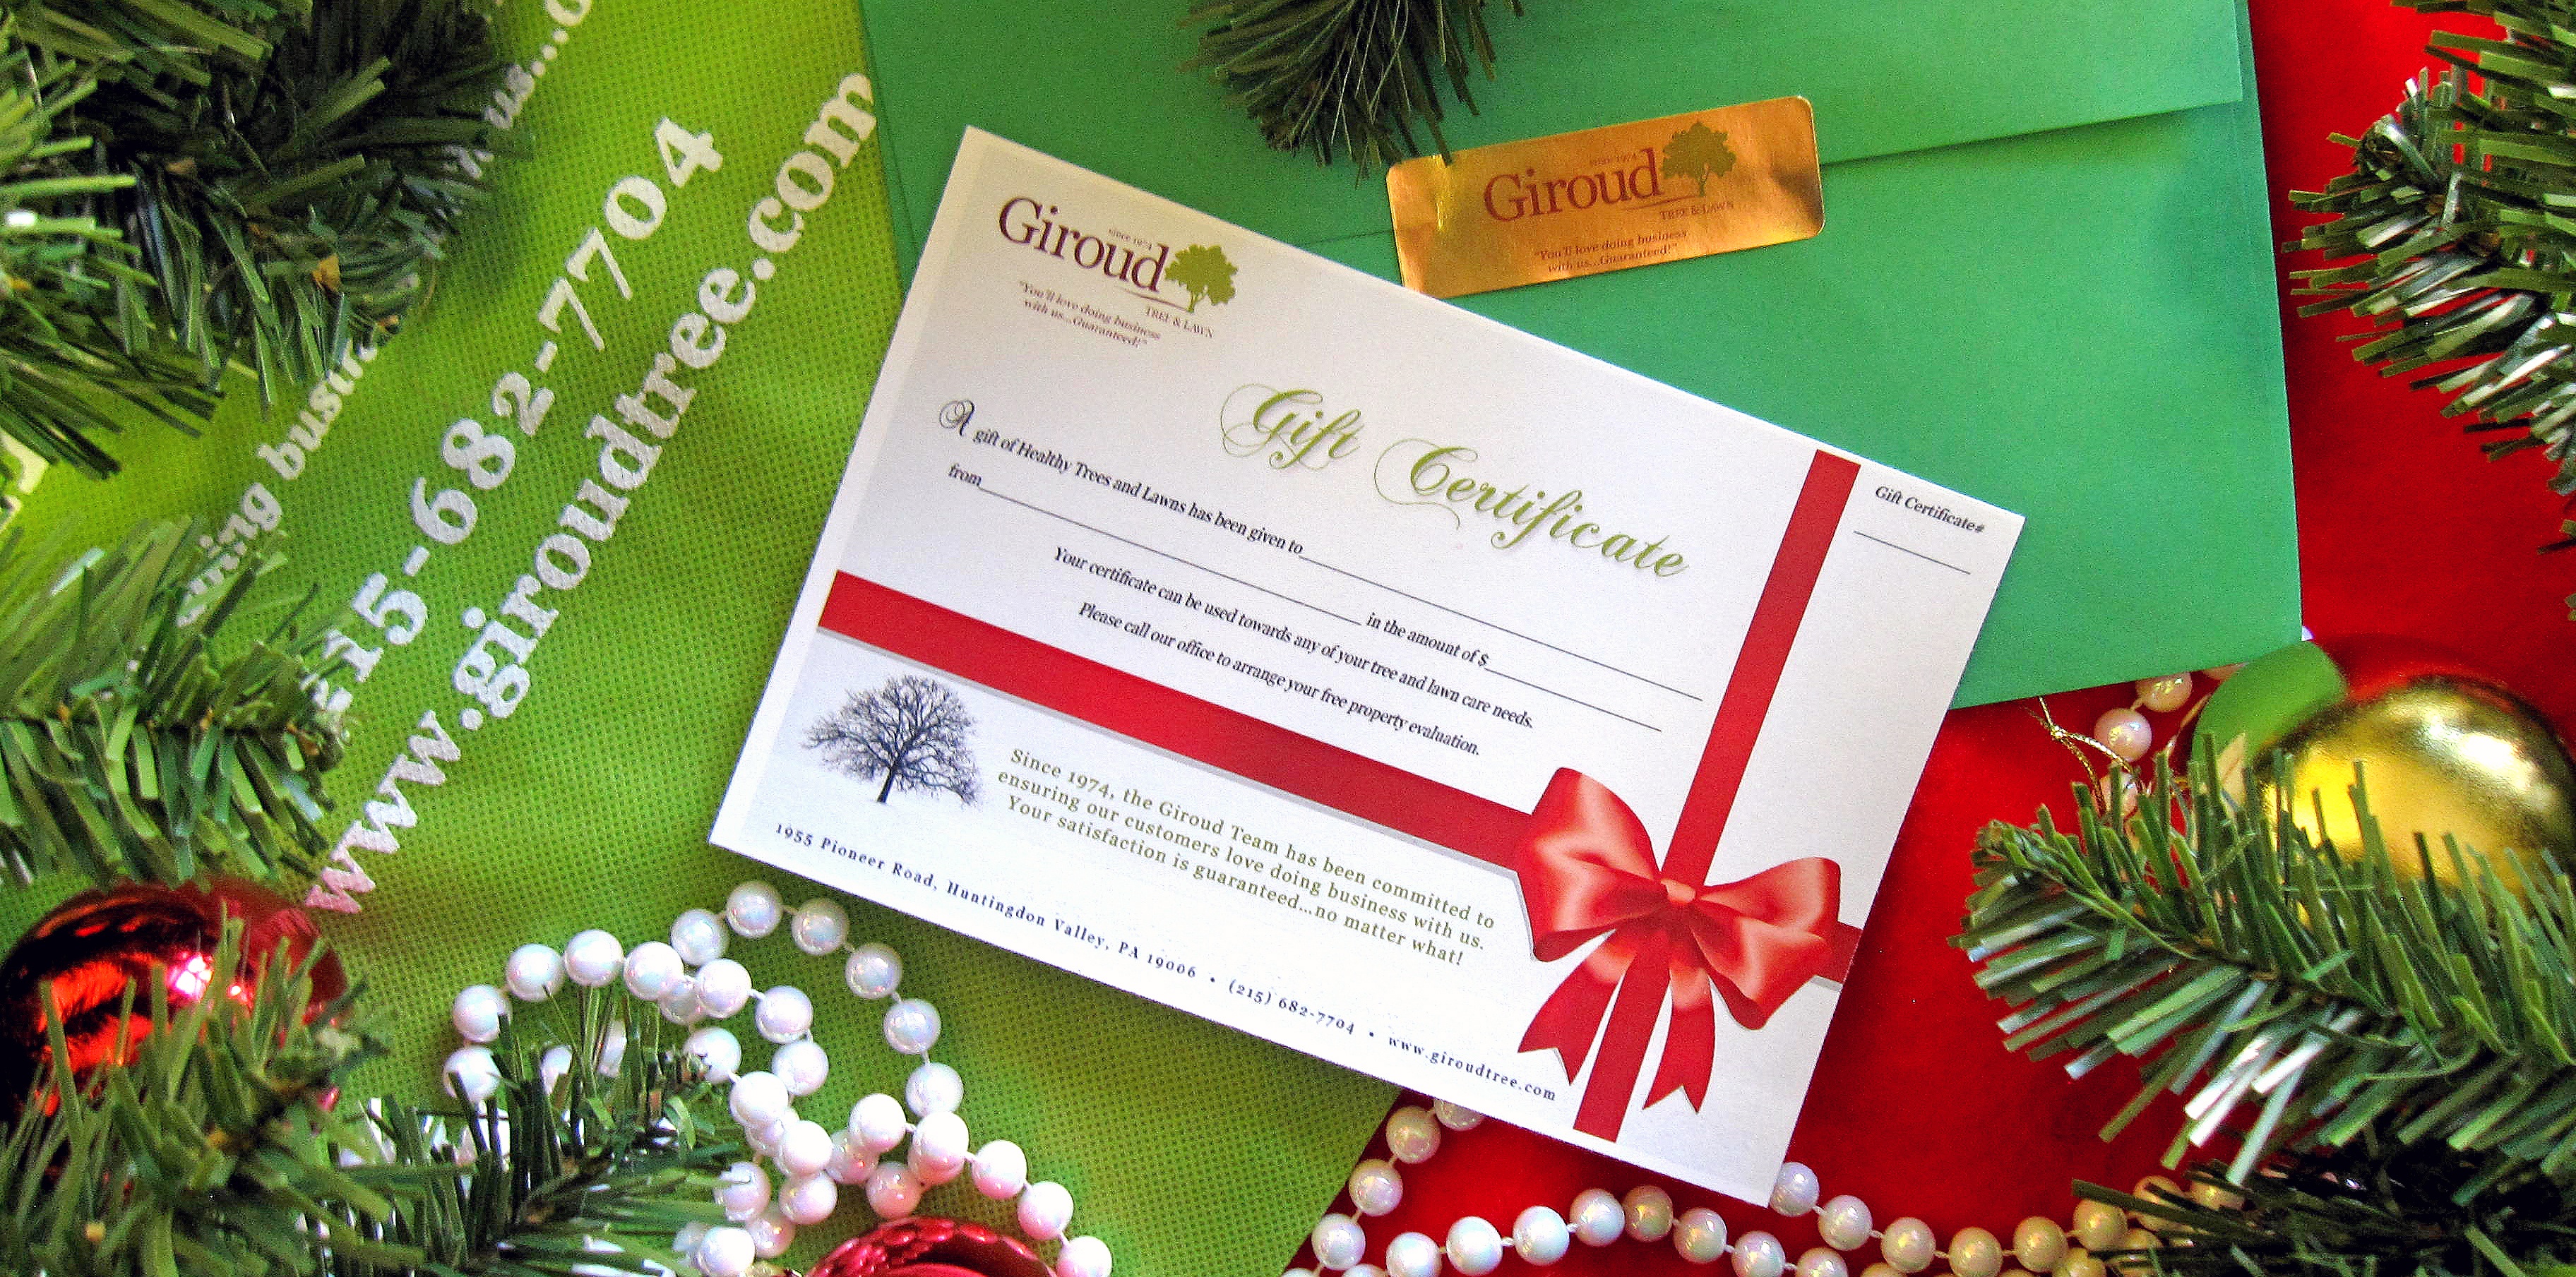 Gifts for Tree and Garden Enthusiast Giroud-Holiday-Gift-Certificate-Display.jpg